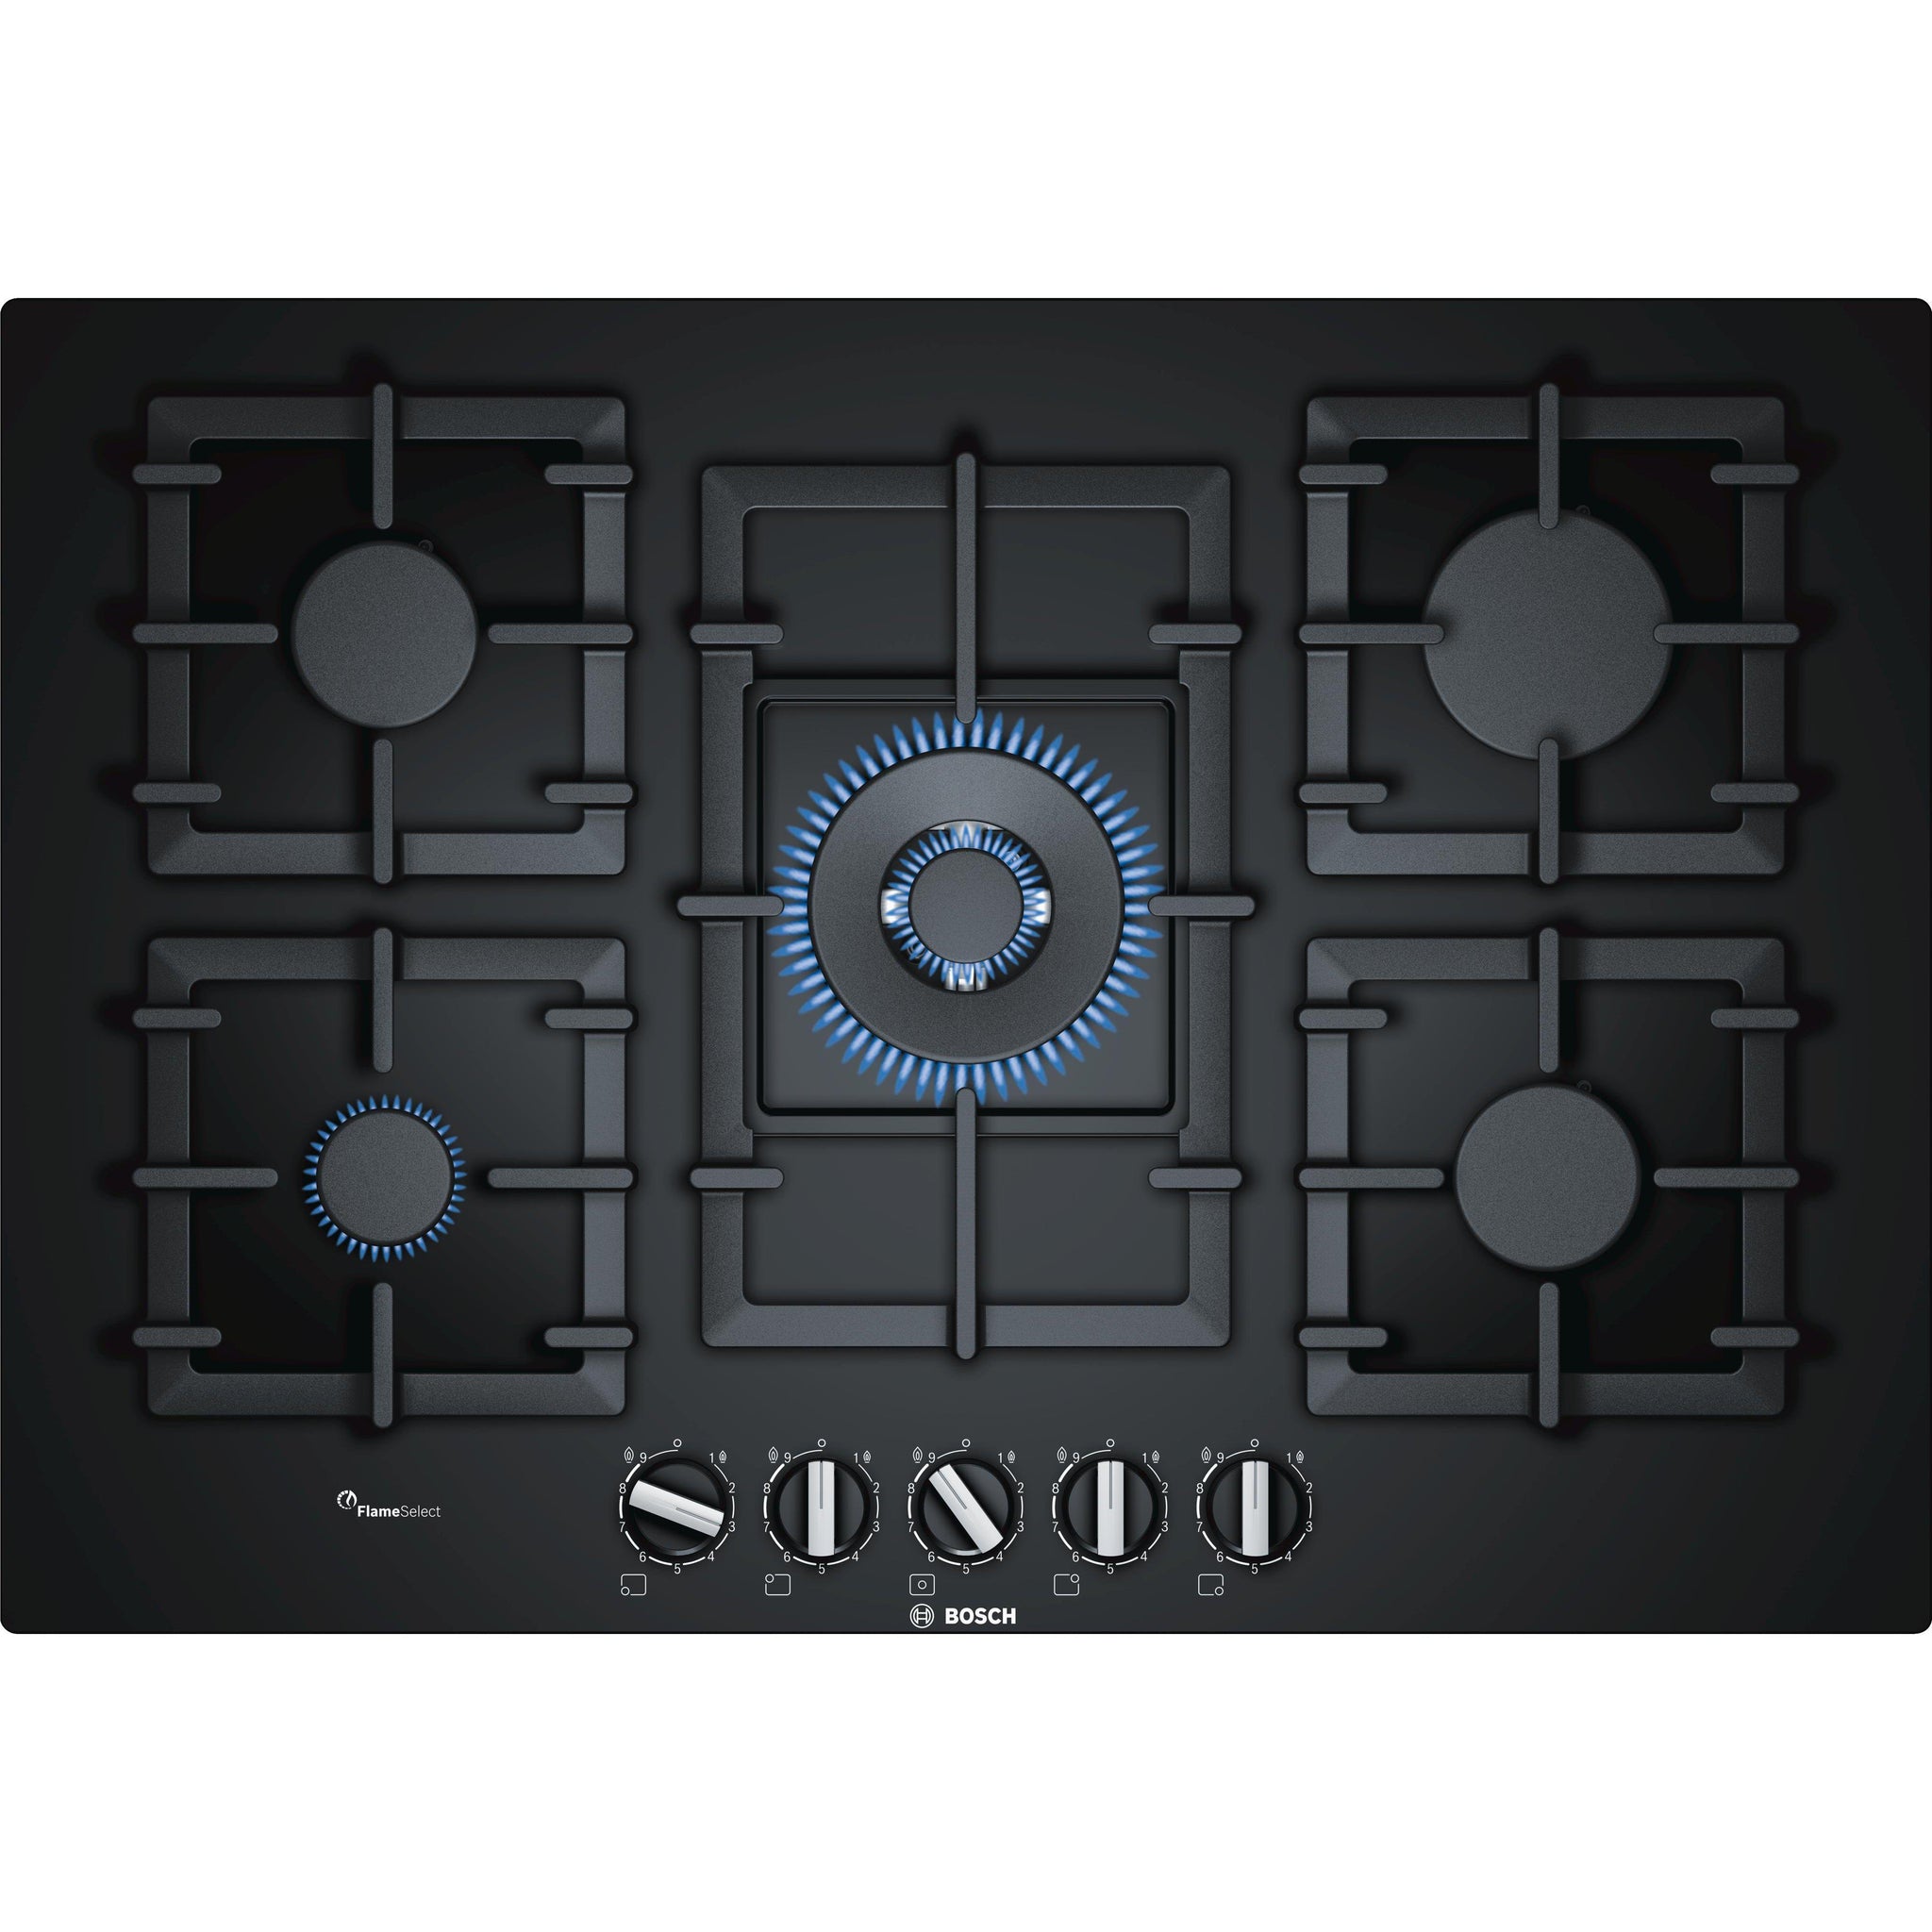 Bosch Series 6 Ppq7a6b90 5 Burner Gas Hob Black Available In 57 Working Days